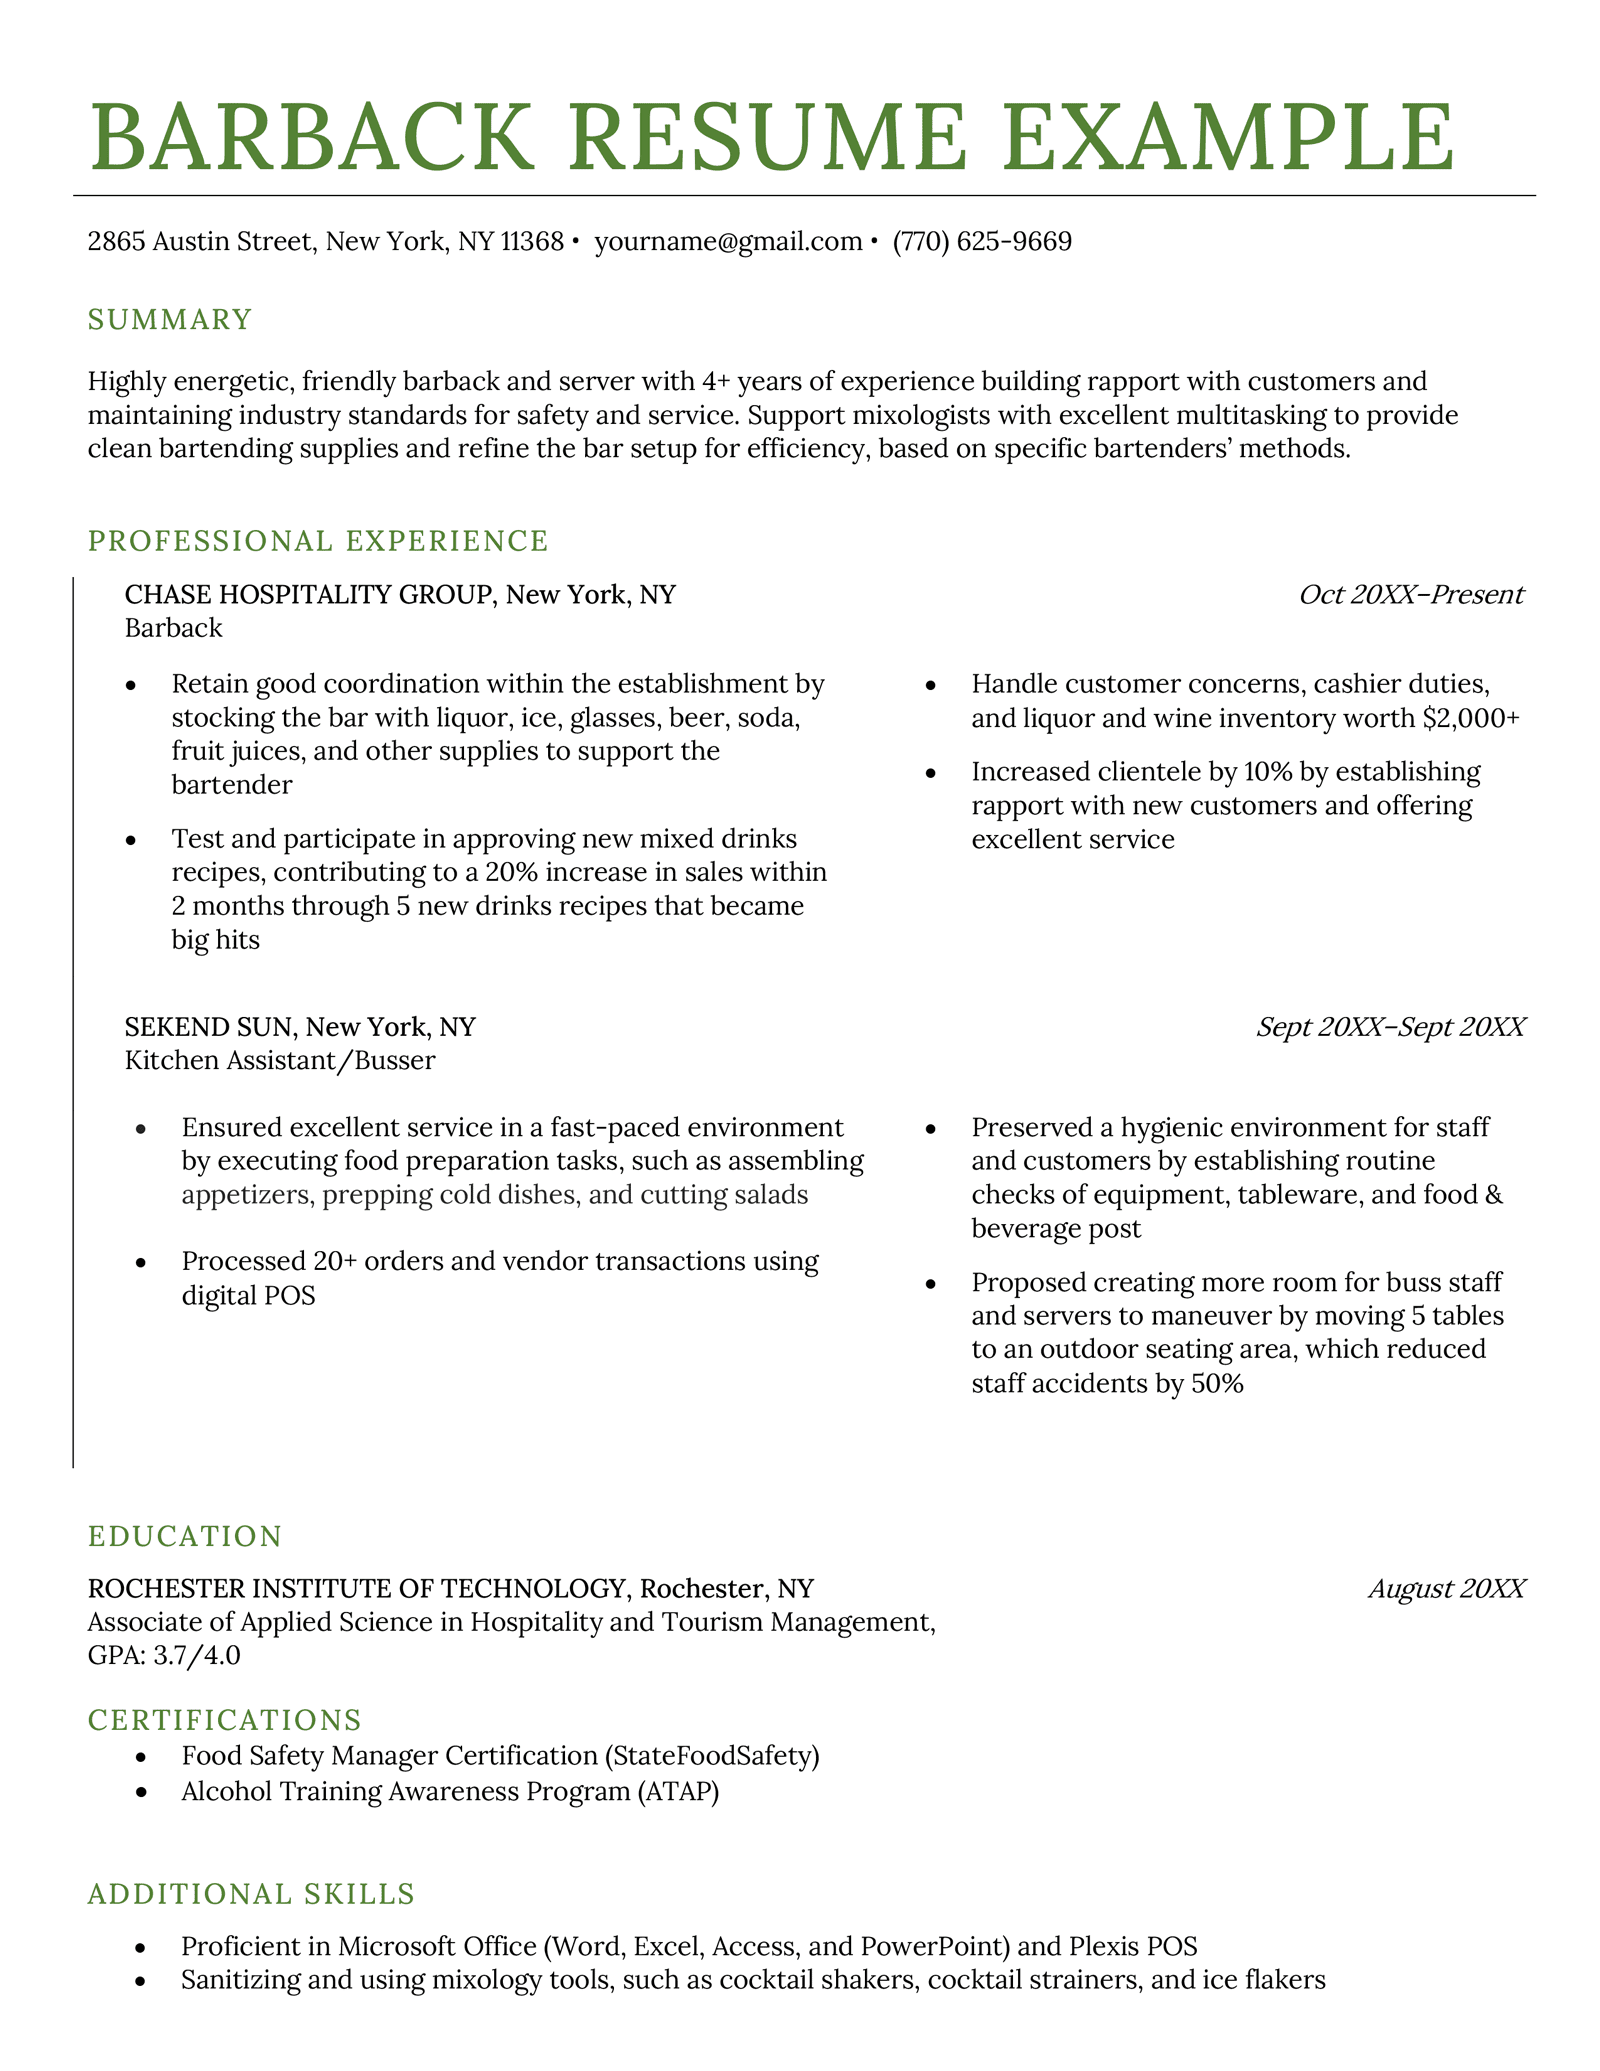 A barback resume sample with a brown title, an objective, as well as professional experience, education, certifications and additional skills sections